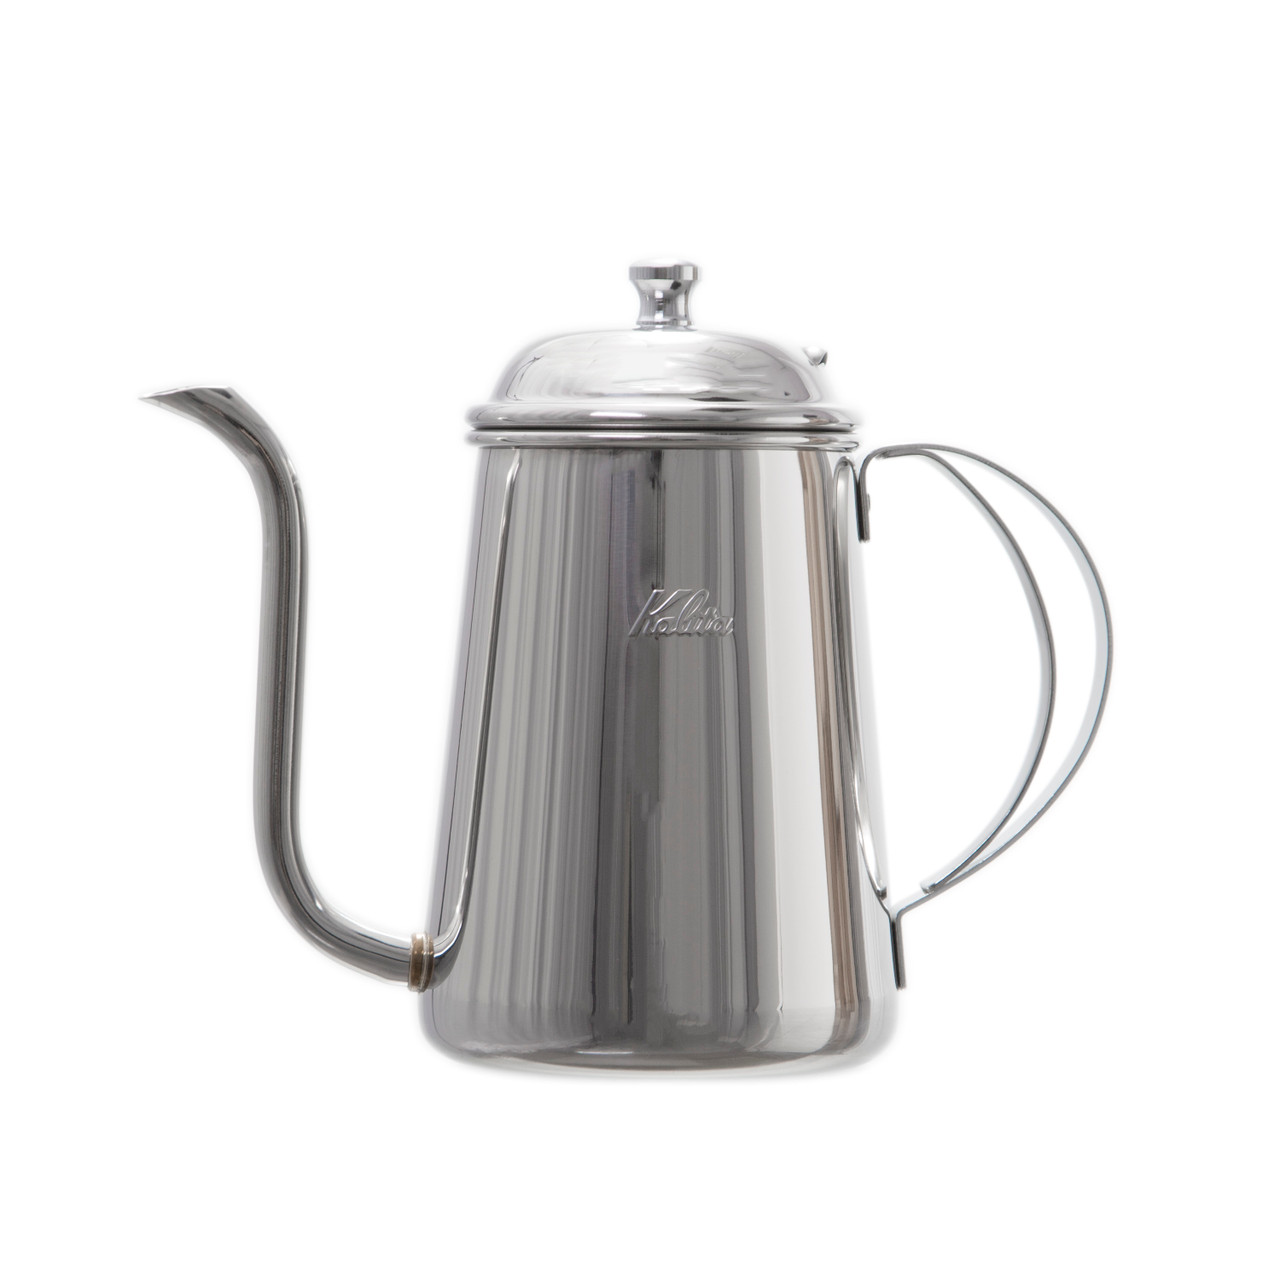 1L/1.2L Stainless Steel Coffee Kettle with Thermometer, Gooseneck Thin  Spout for Hand Drip Pour